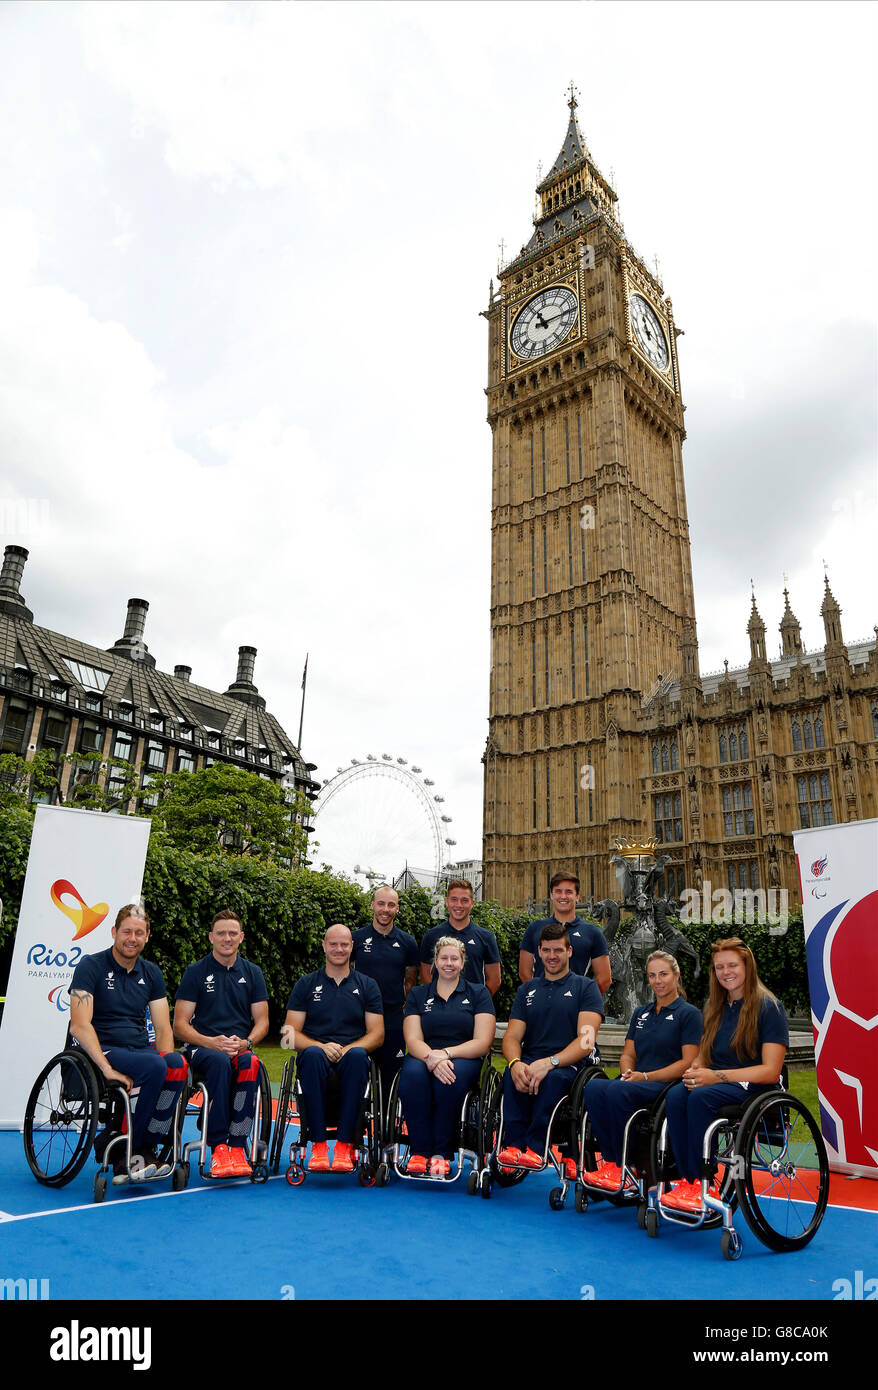 (From left to right) Anthony Cotterill, Jamie Burdekin, Marc McCarroll, Andy Lapthorne, Alfie Hewett, Gordon Reid, David Phillipson, Lucy Shuker and Jordanne Whiley during the team announcement at New Palace Yard, London. Stock Photo